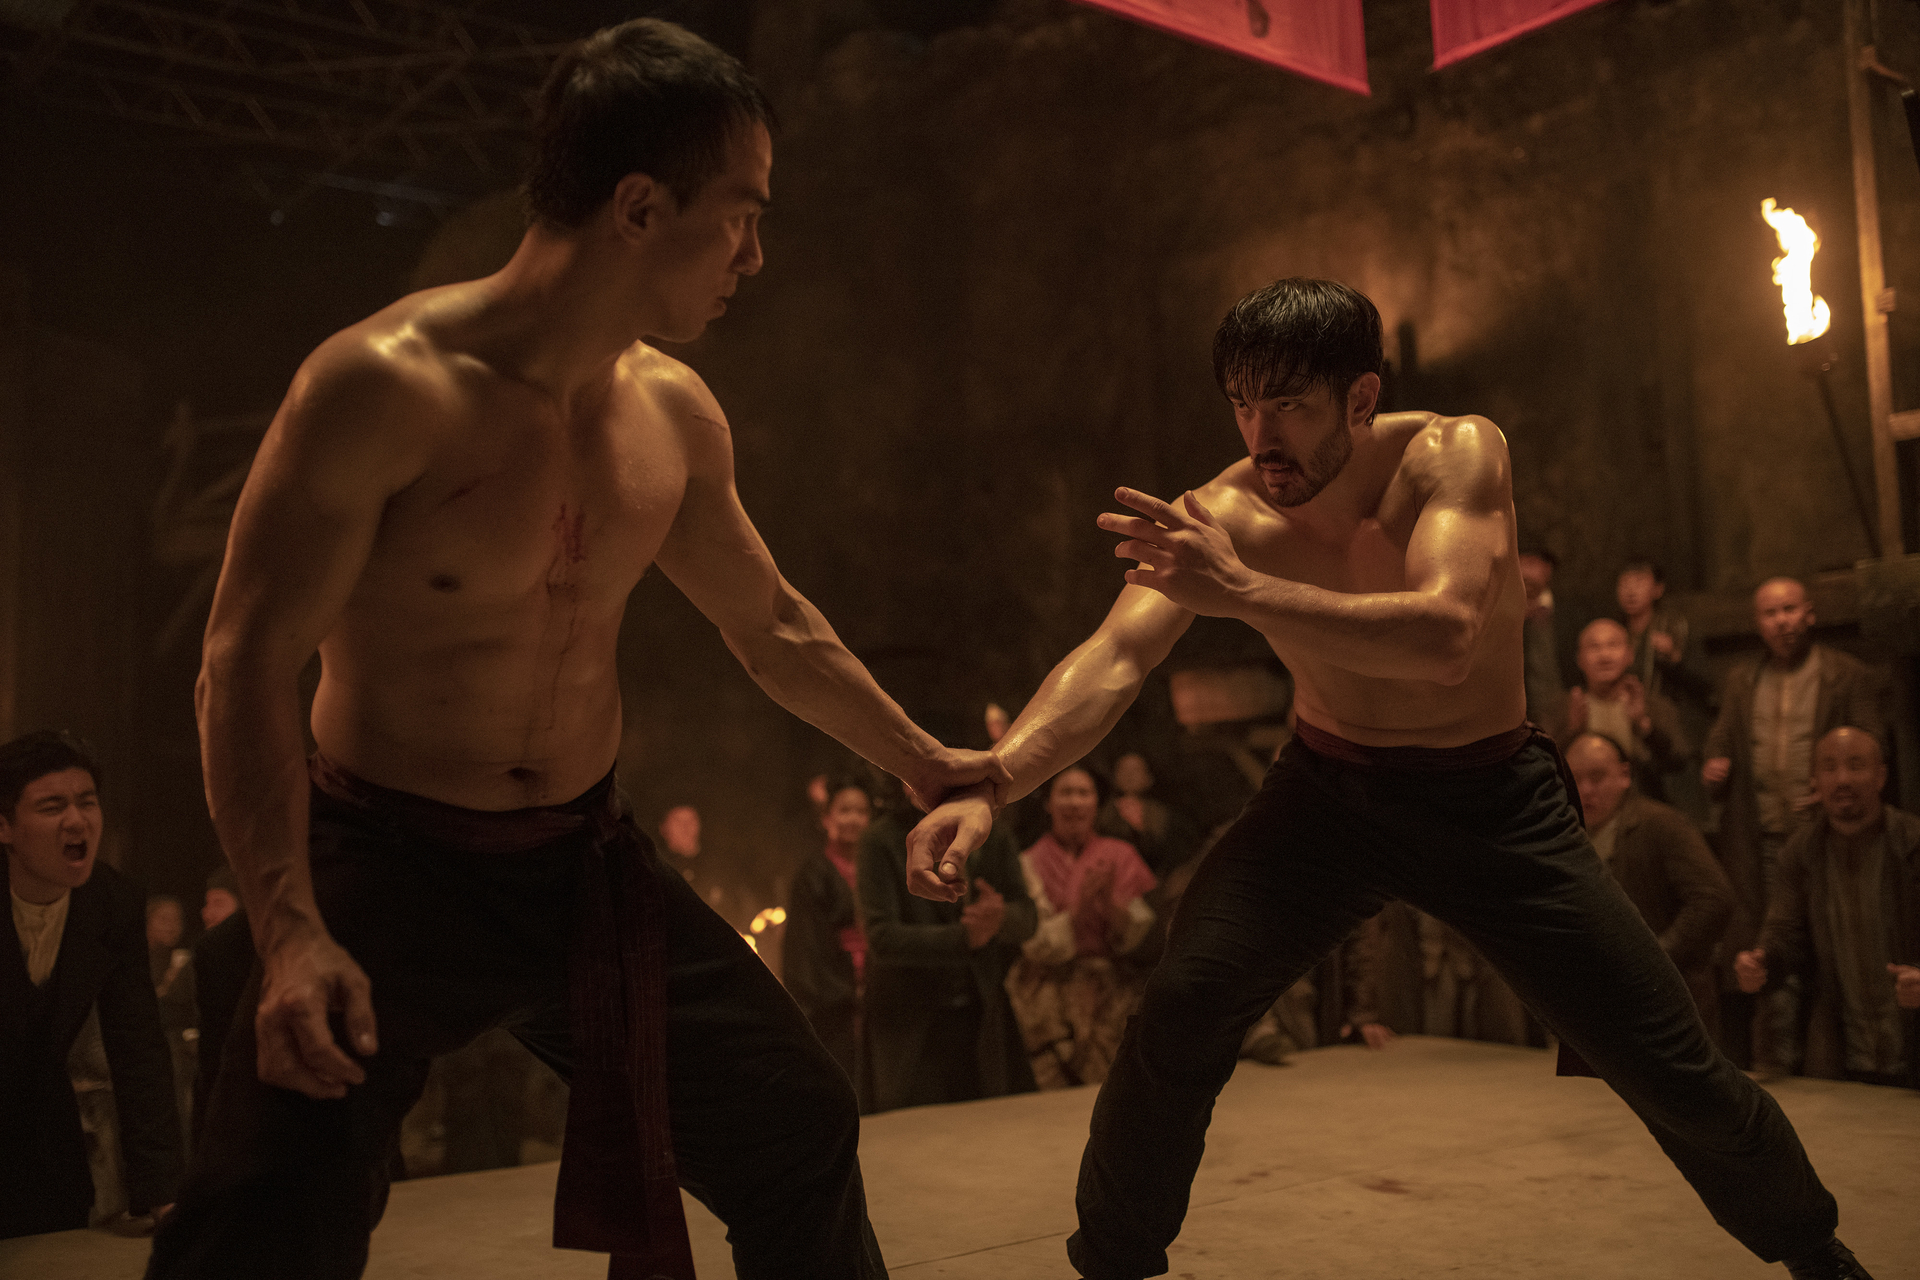 Andrew Koji and Joe Taslim, both shirtless and drenched in sweat, grasp onto each other in fighting stances as excited onlookers watch in Warrior.